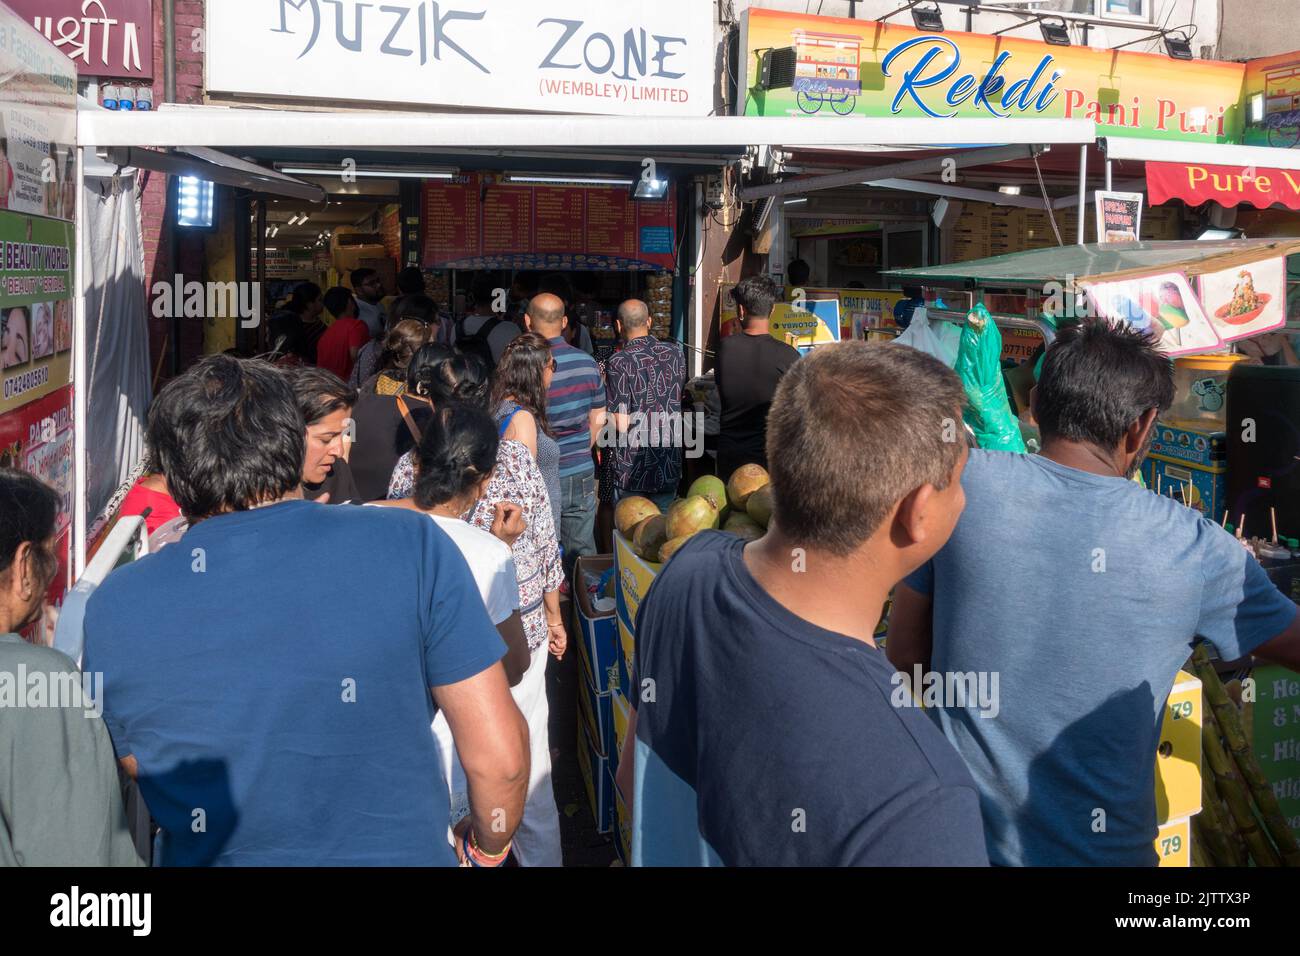 Long queue in Indian street food area in Wembley Stock Photo